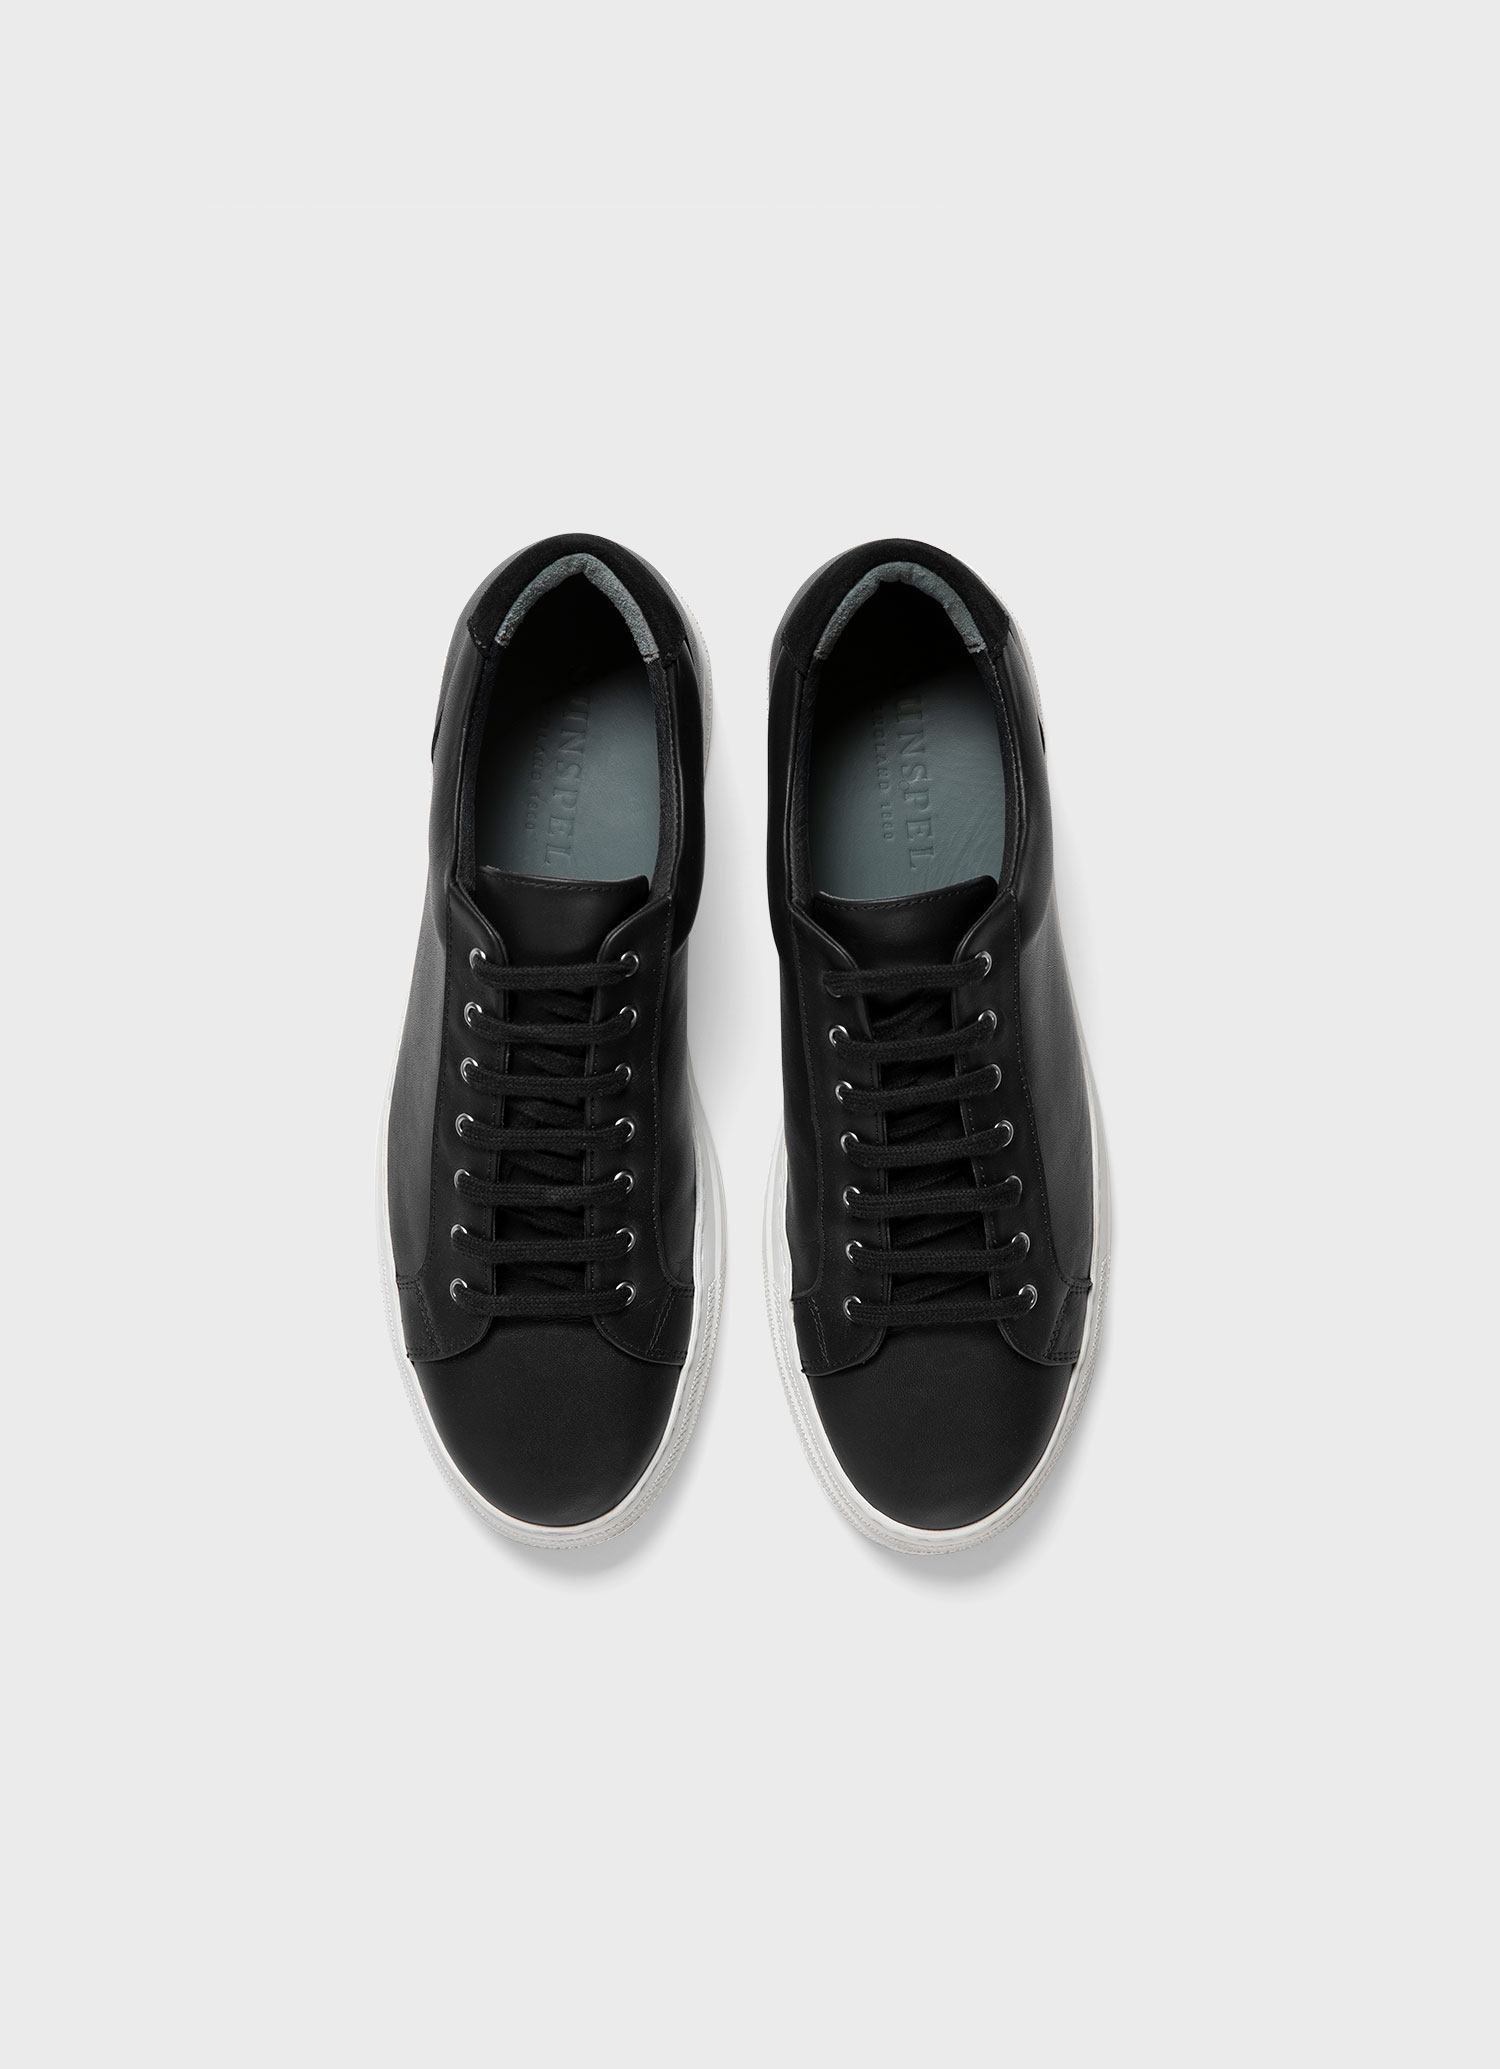 Women's Leather Tennis Shoes in Black